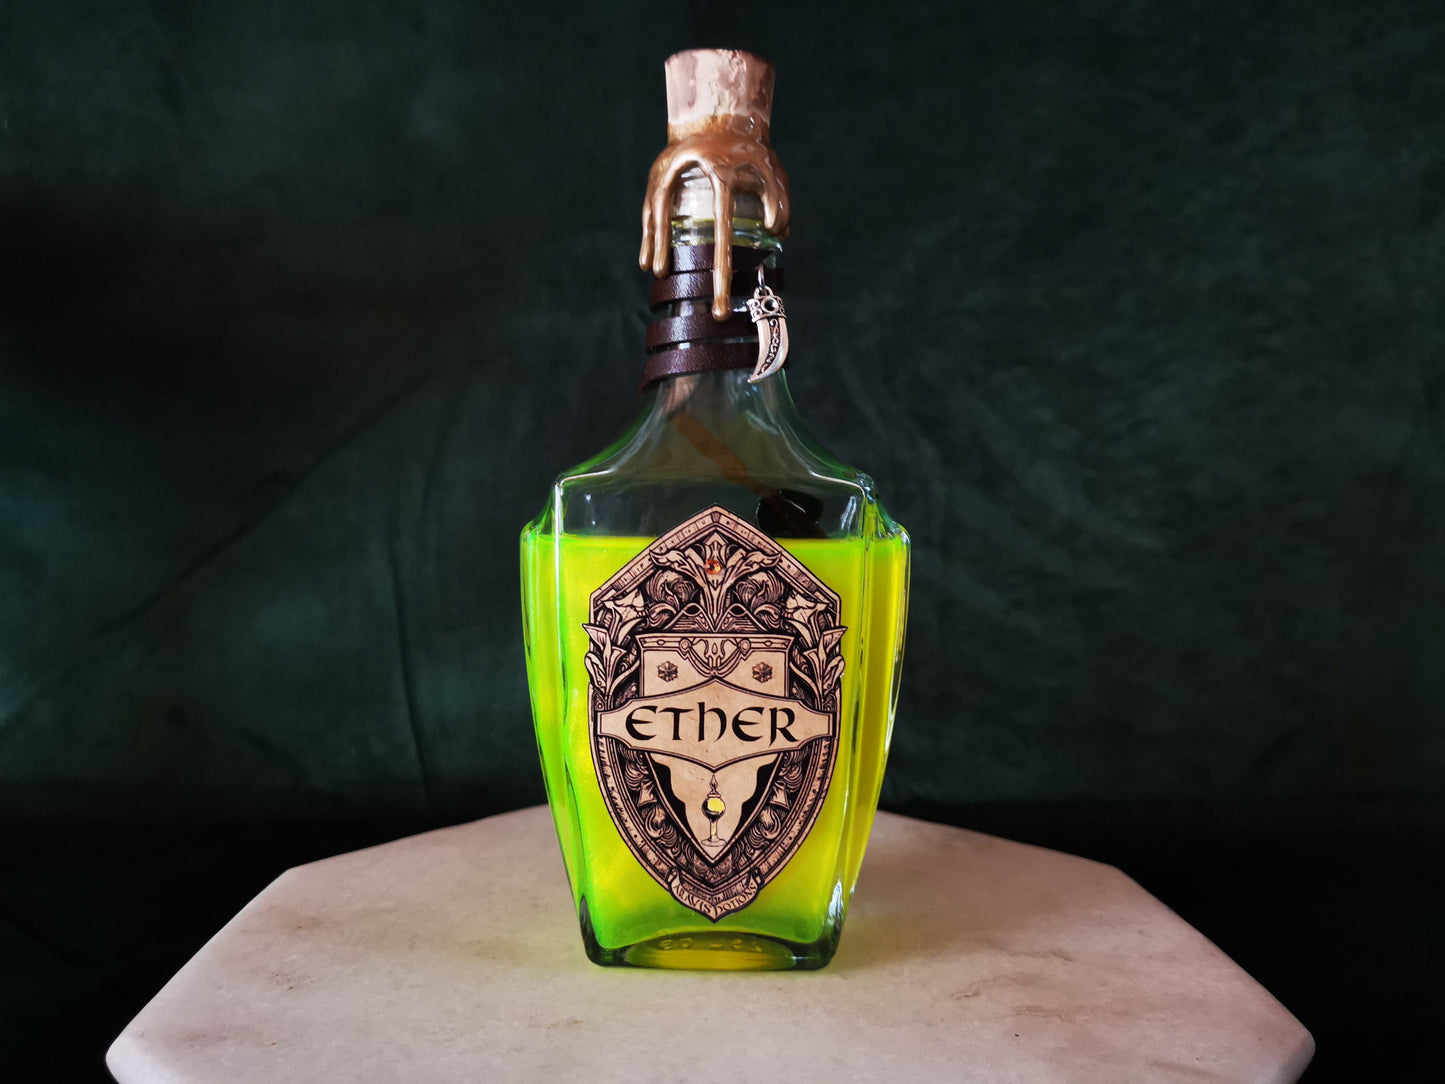 Ether - Final Fantasy Aravis Potions Apothecary Harry Potter